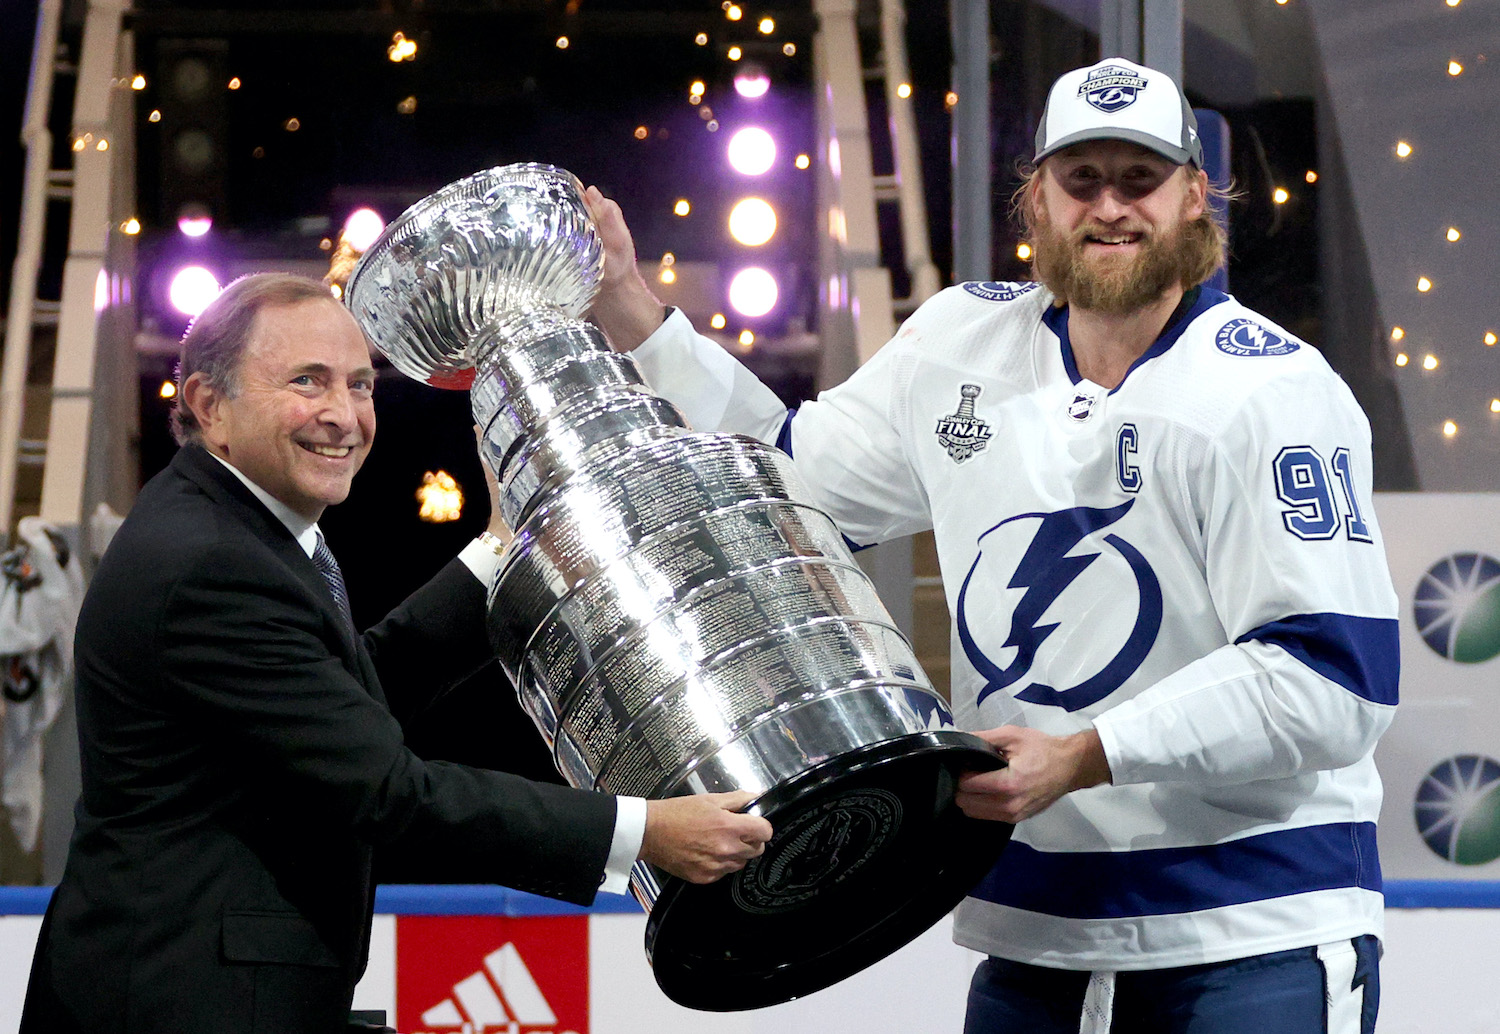 Steven Stamkos claims the Stanley Cup after winning the 2020 NHL championship.